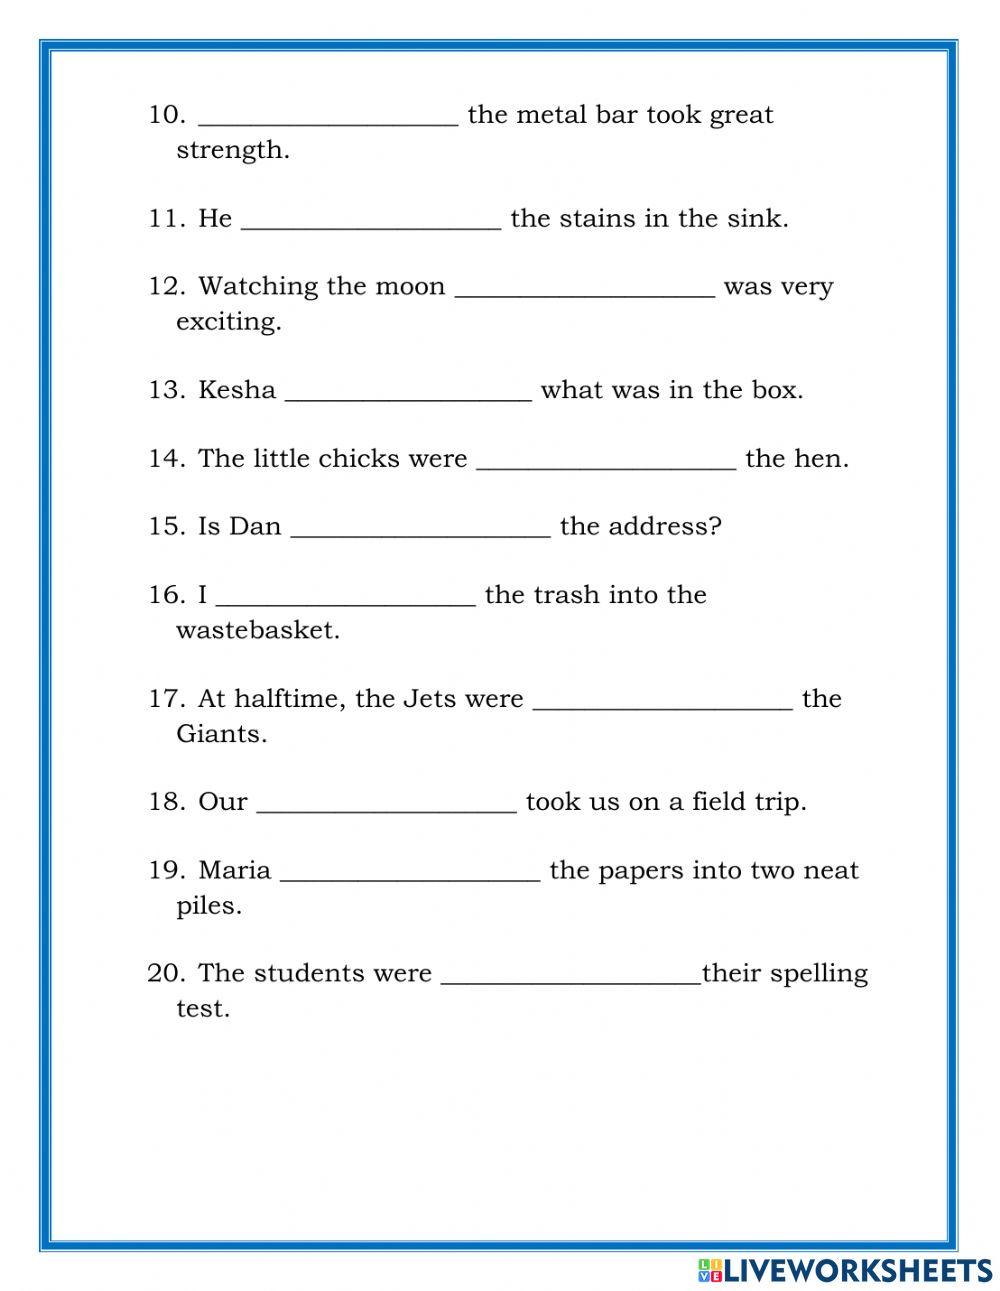 Inflectional Endings ed er and ing- Adding ed er and ing